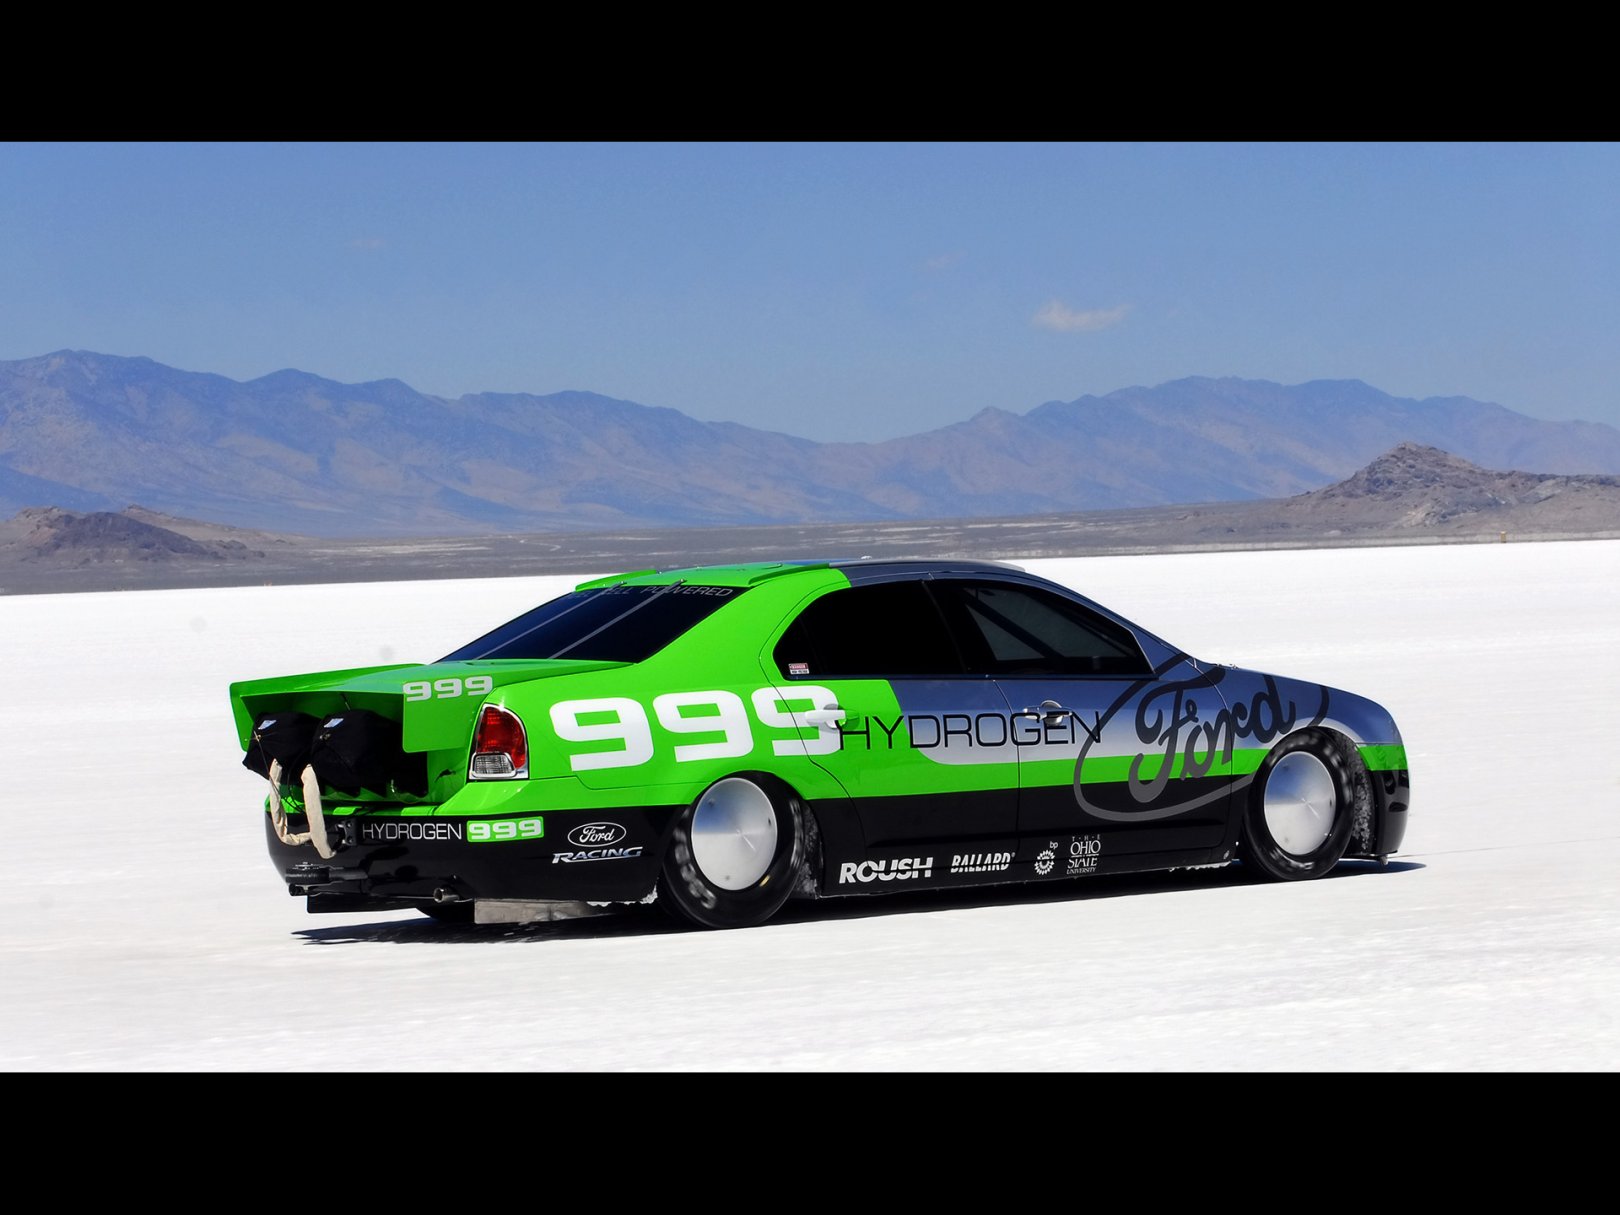 Foto: Ford Fusion Hydrogen 999 Land Speed Record Ford Fusion Hydrogen 999 Marks Milestone 6 (2007)